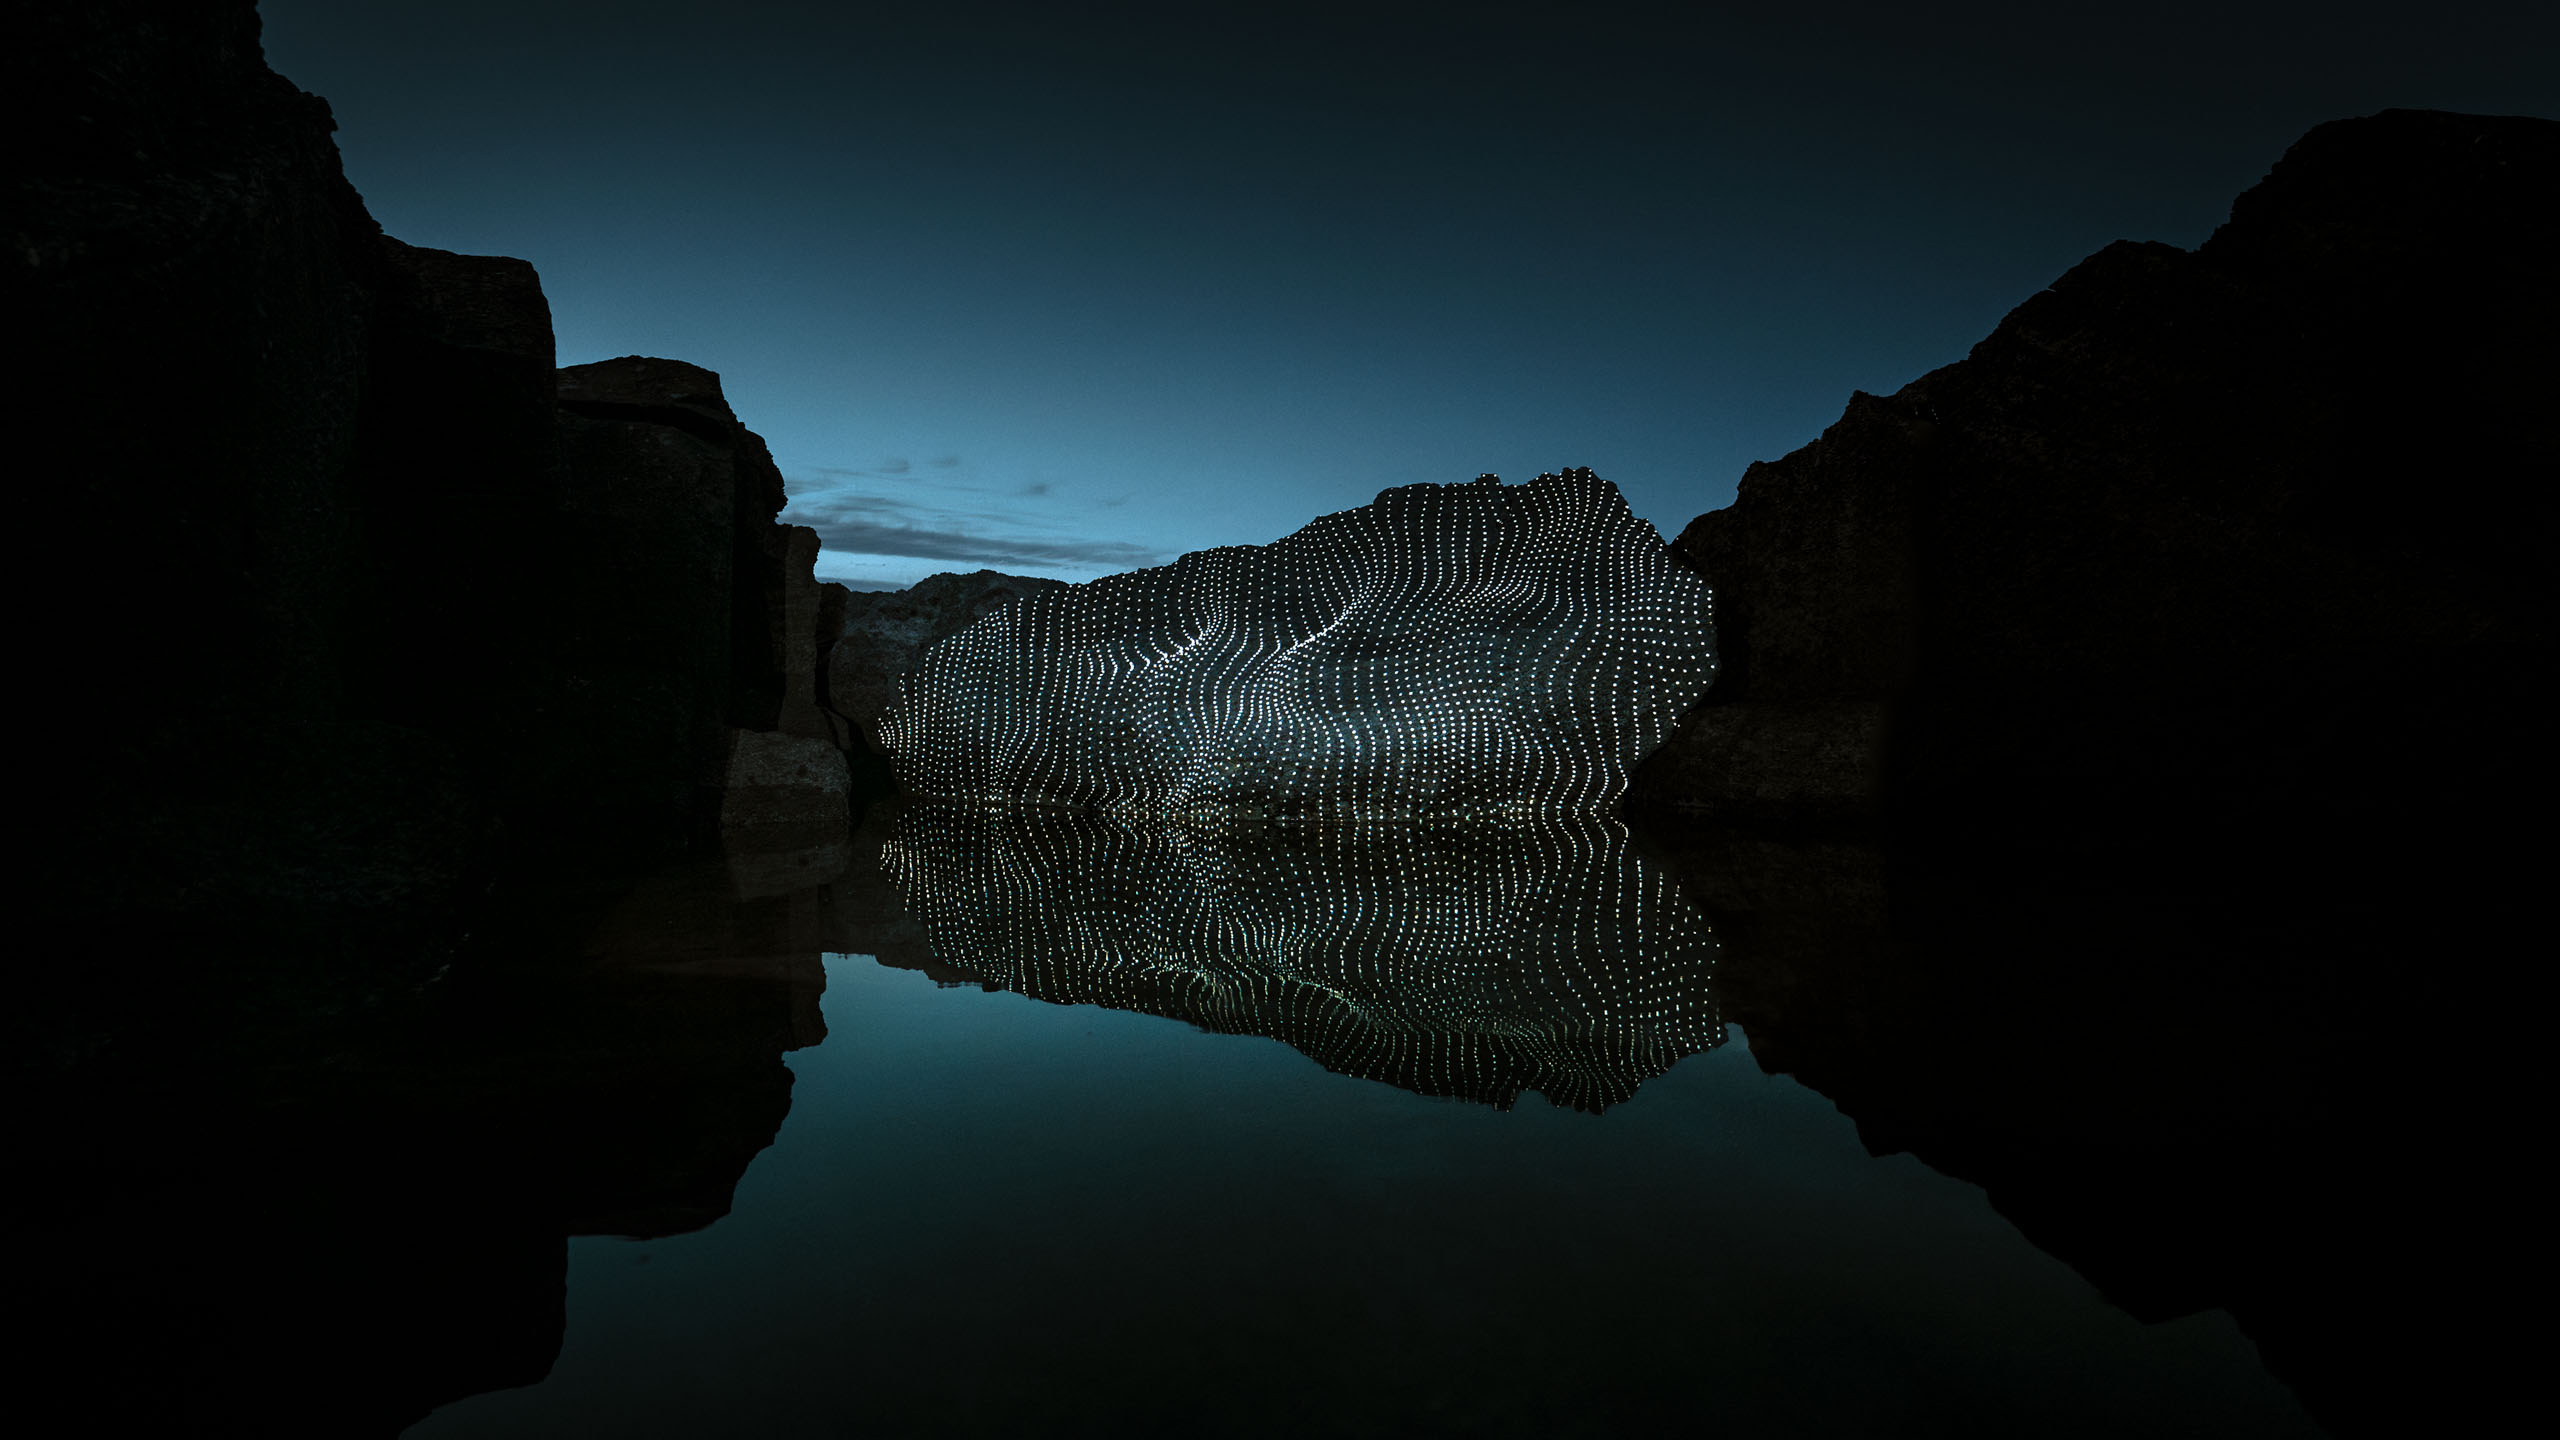 Video-mapping projections in nature on a beautiful boulder mirrored in calm water